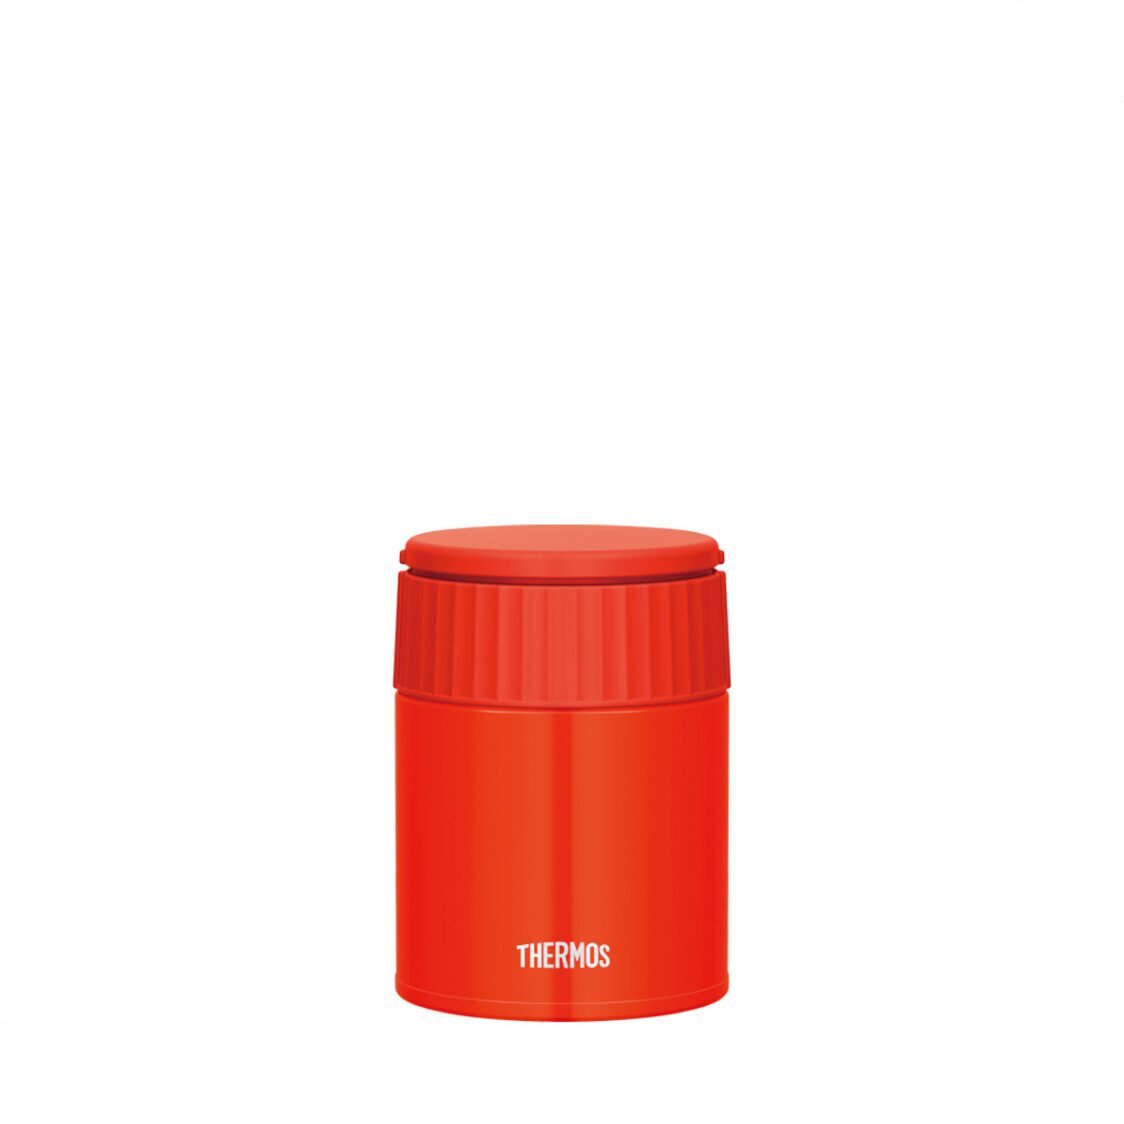 Thermos 04L Stainless Steel Food Jar